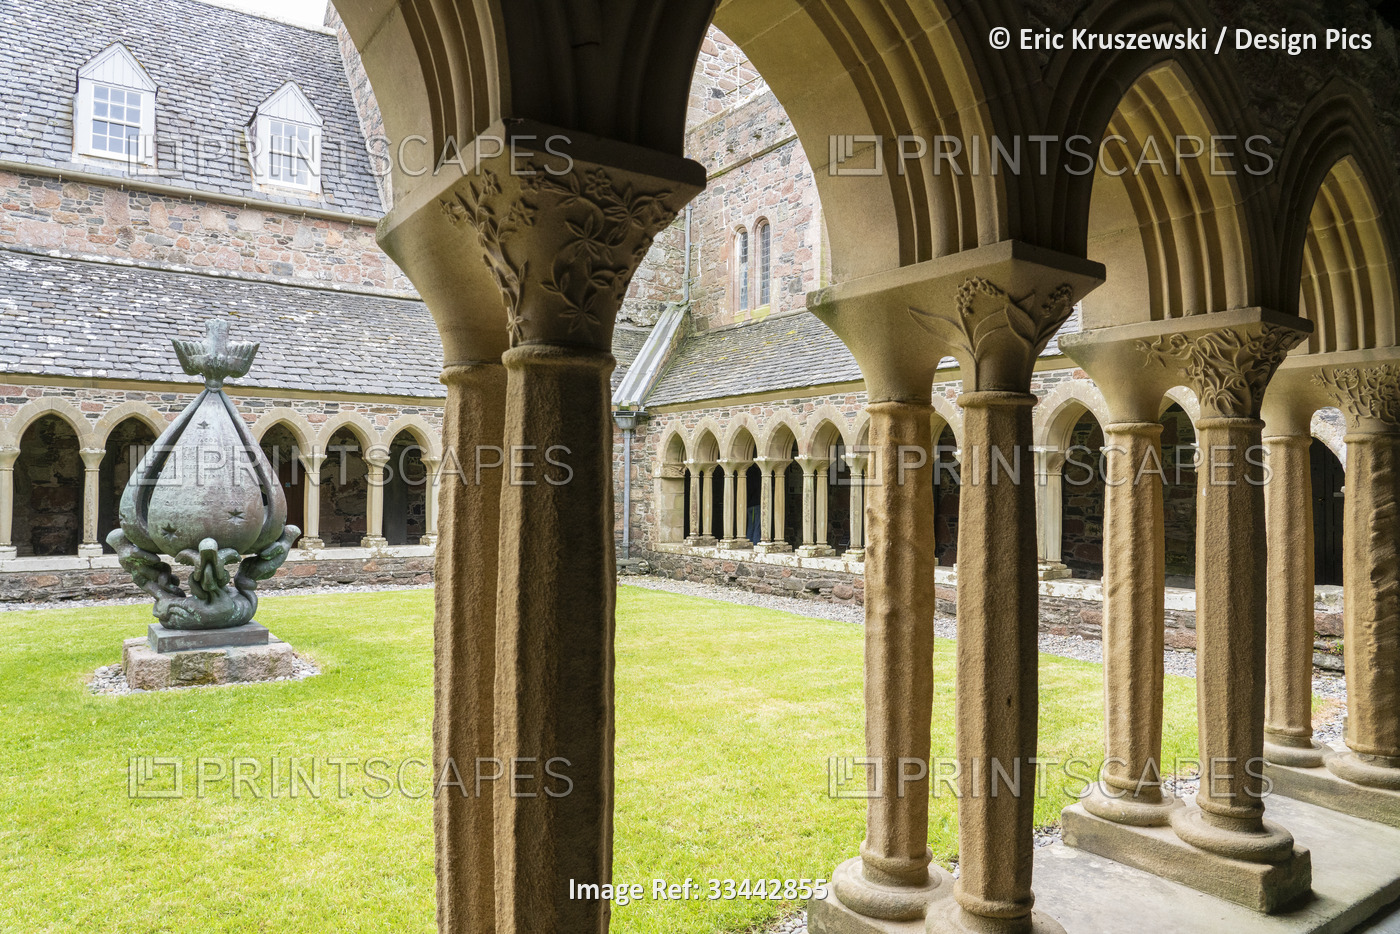 Sculptured columns line the cloisters inner courtyard of the Benedictine Abbey ...